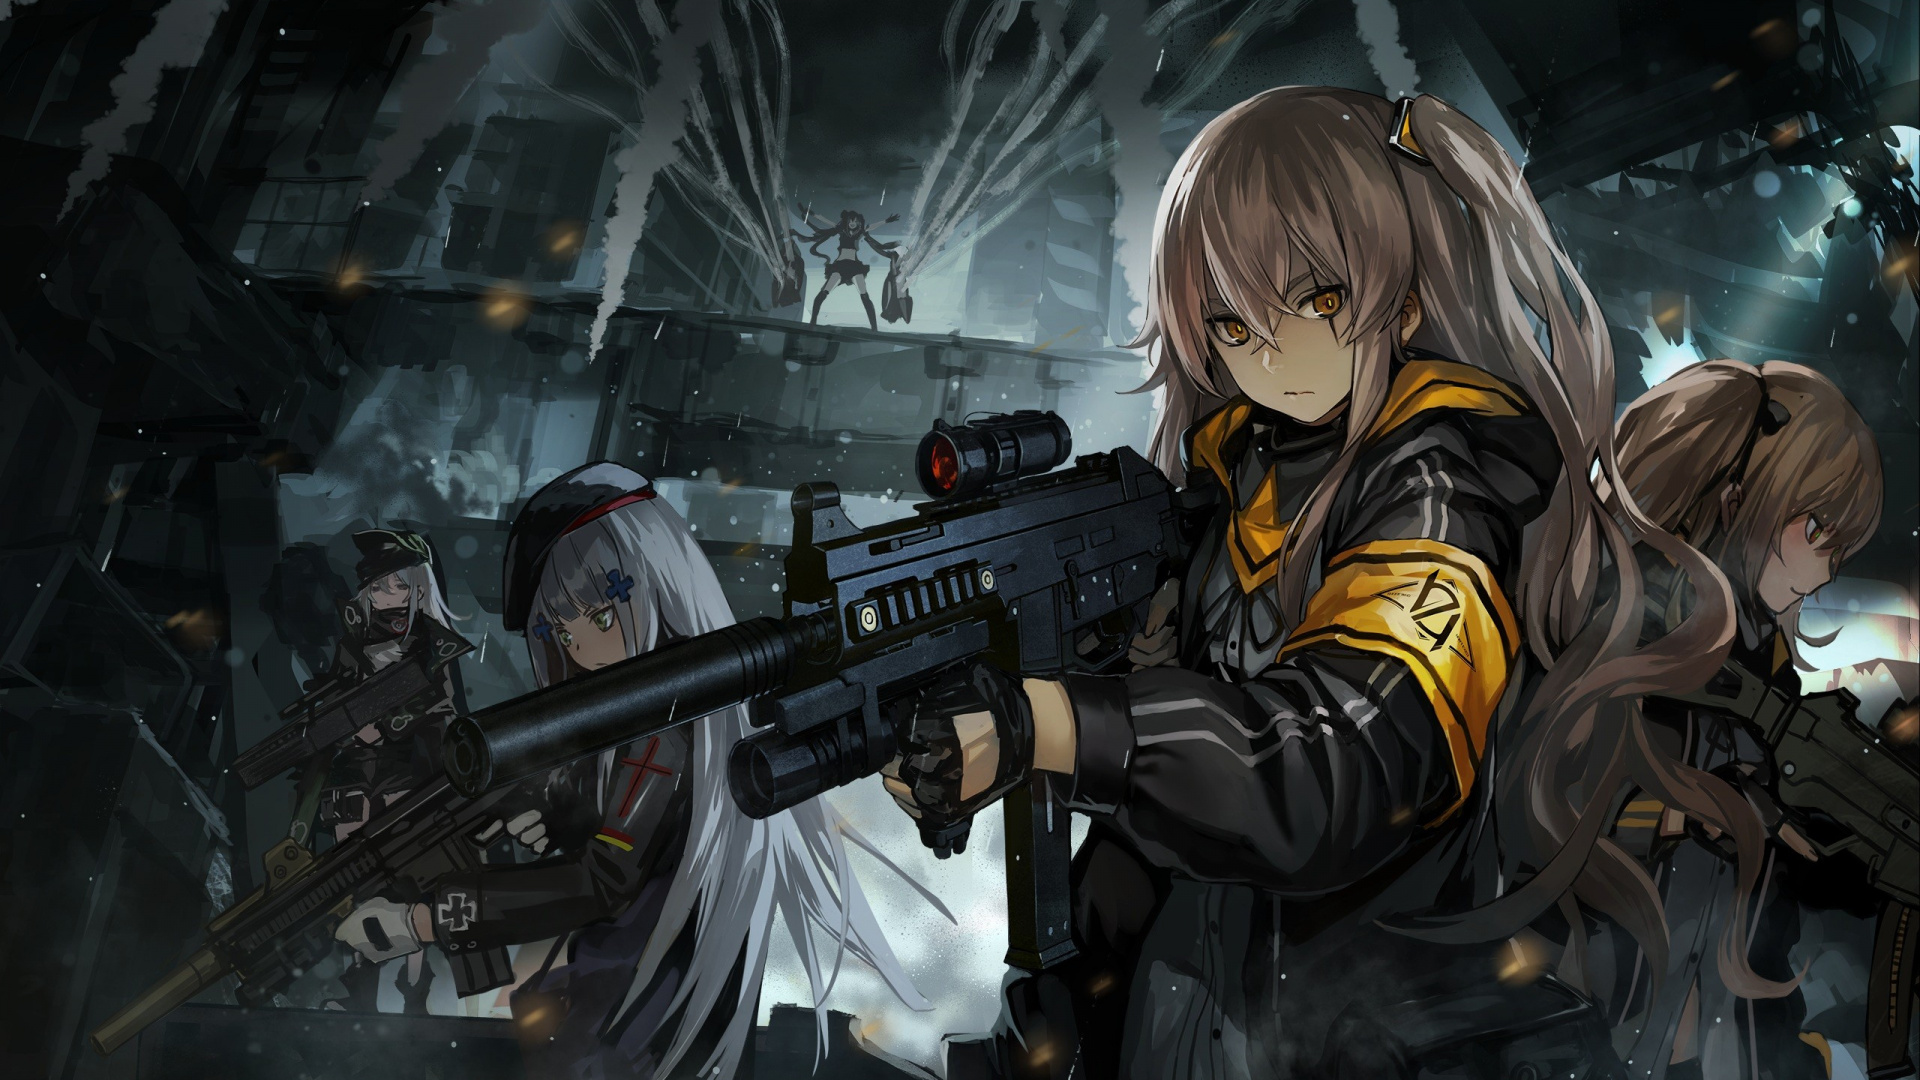 Blonde Haired Male Anime Character Holding Rifle. Wallpaper in 1920x1080 Resolution